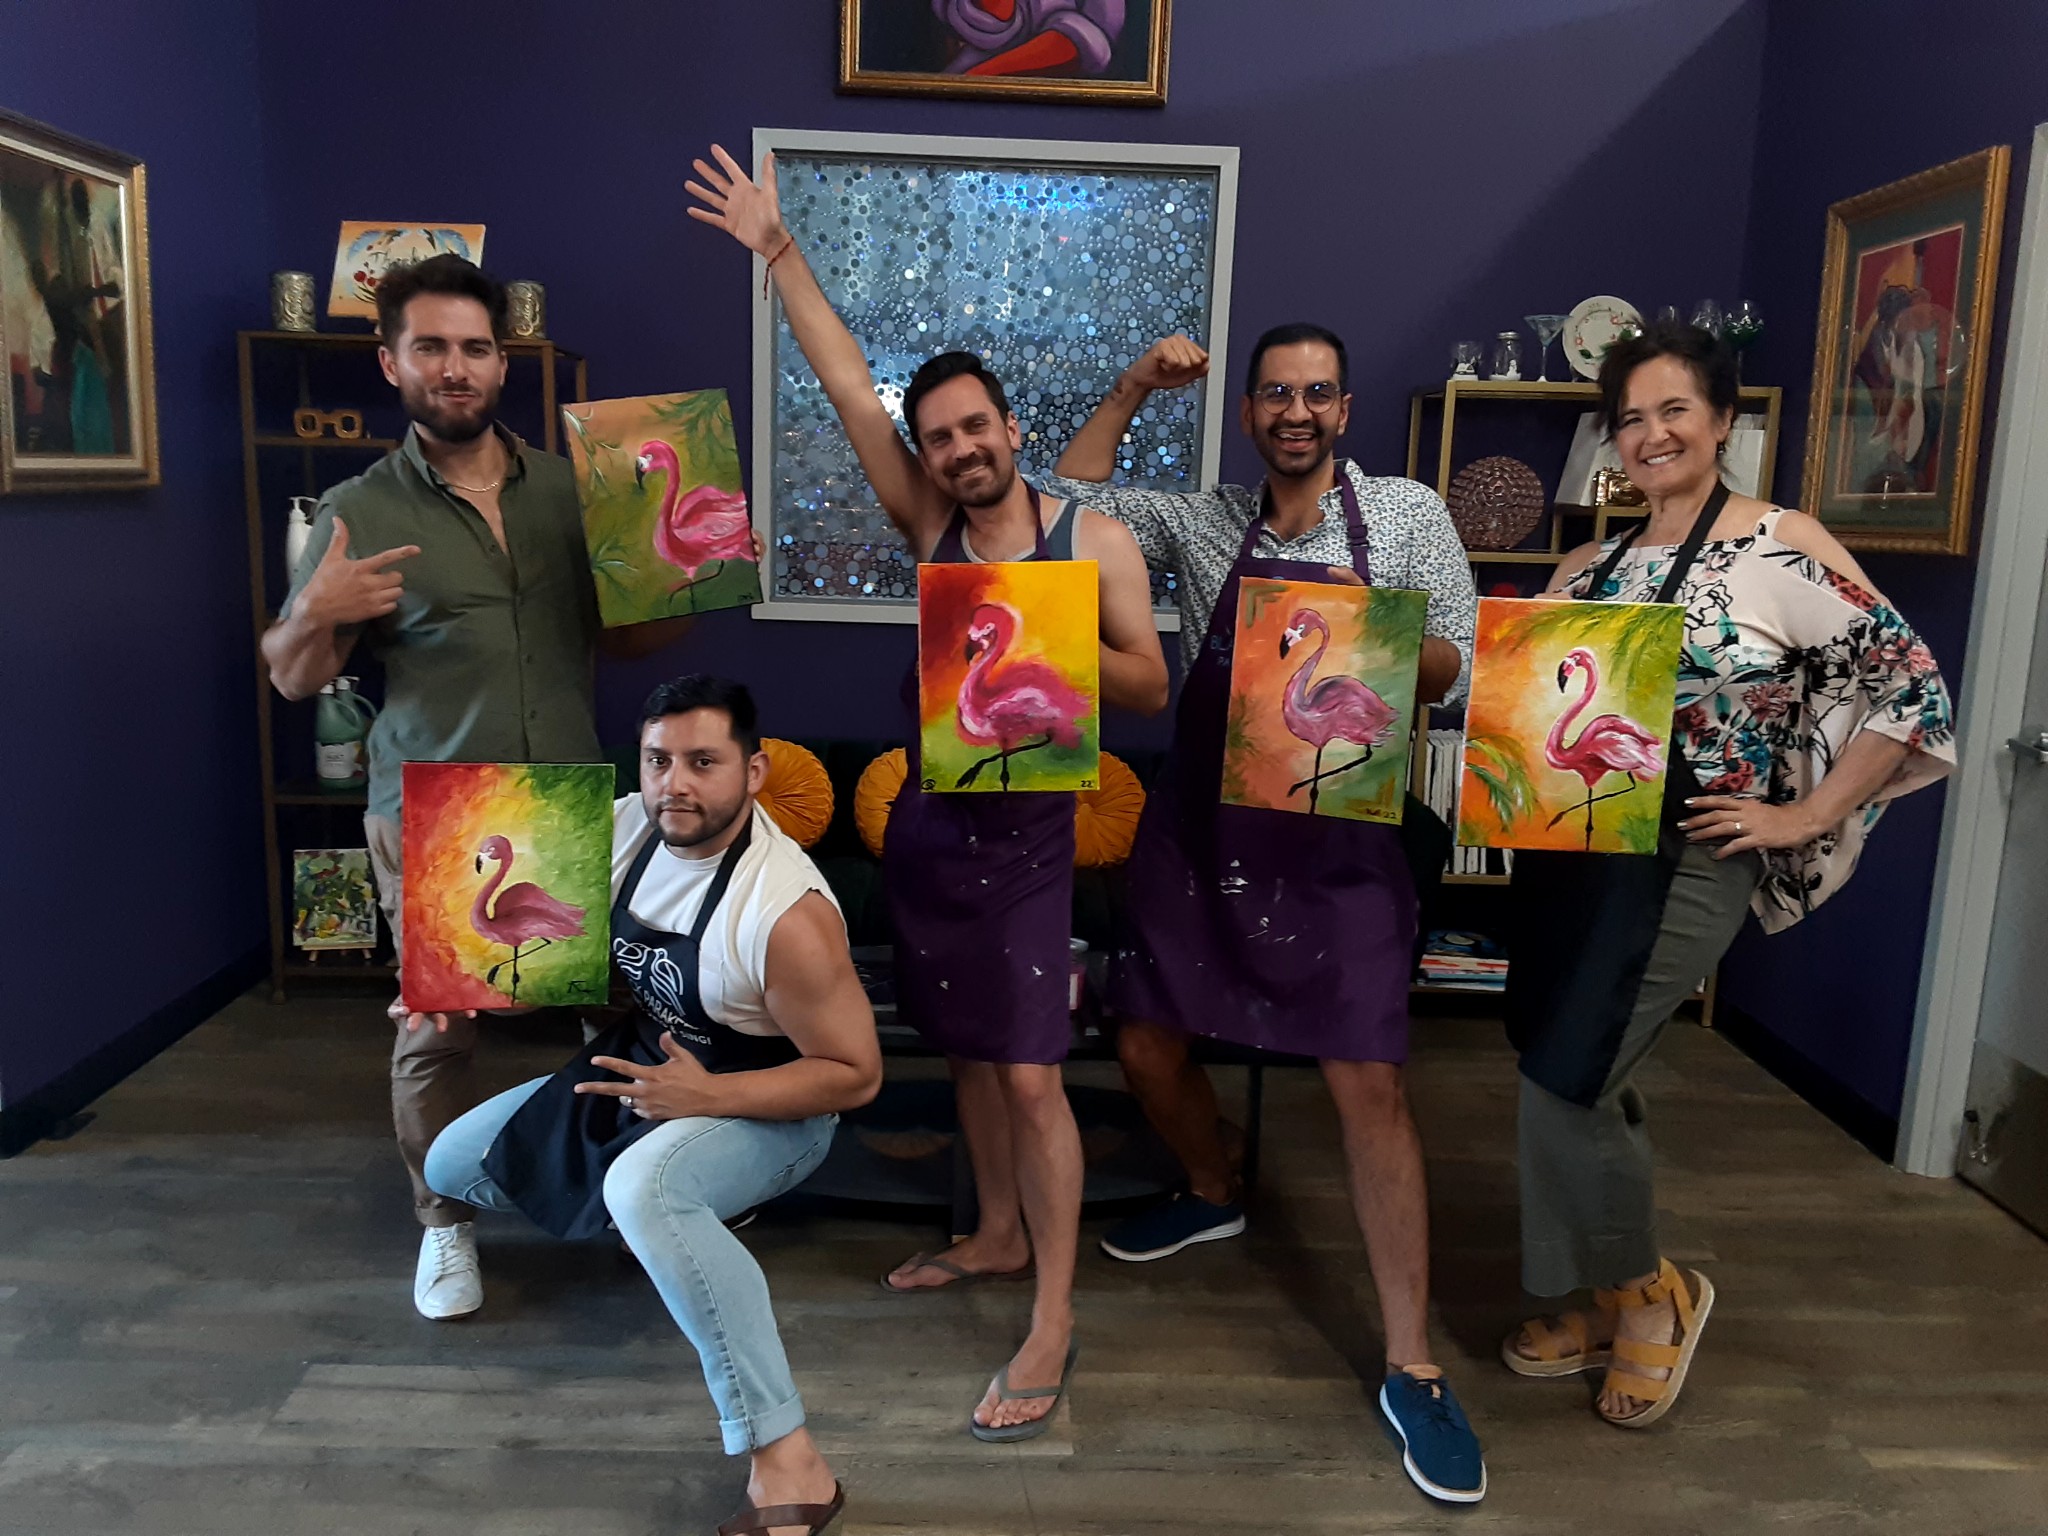 A group of people posing for a picture in an art studio.